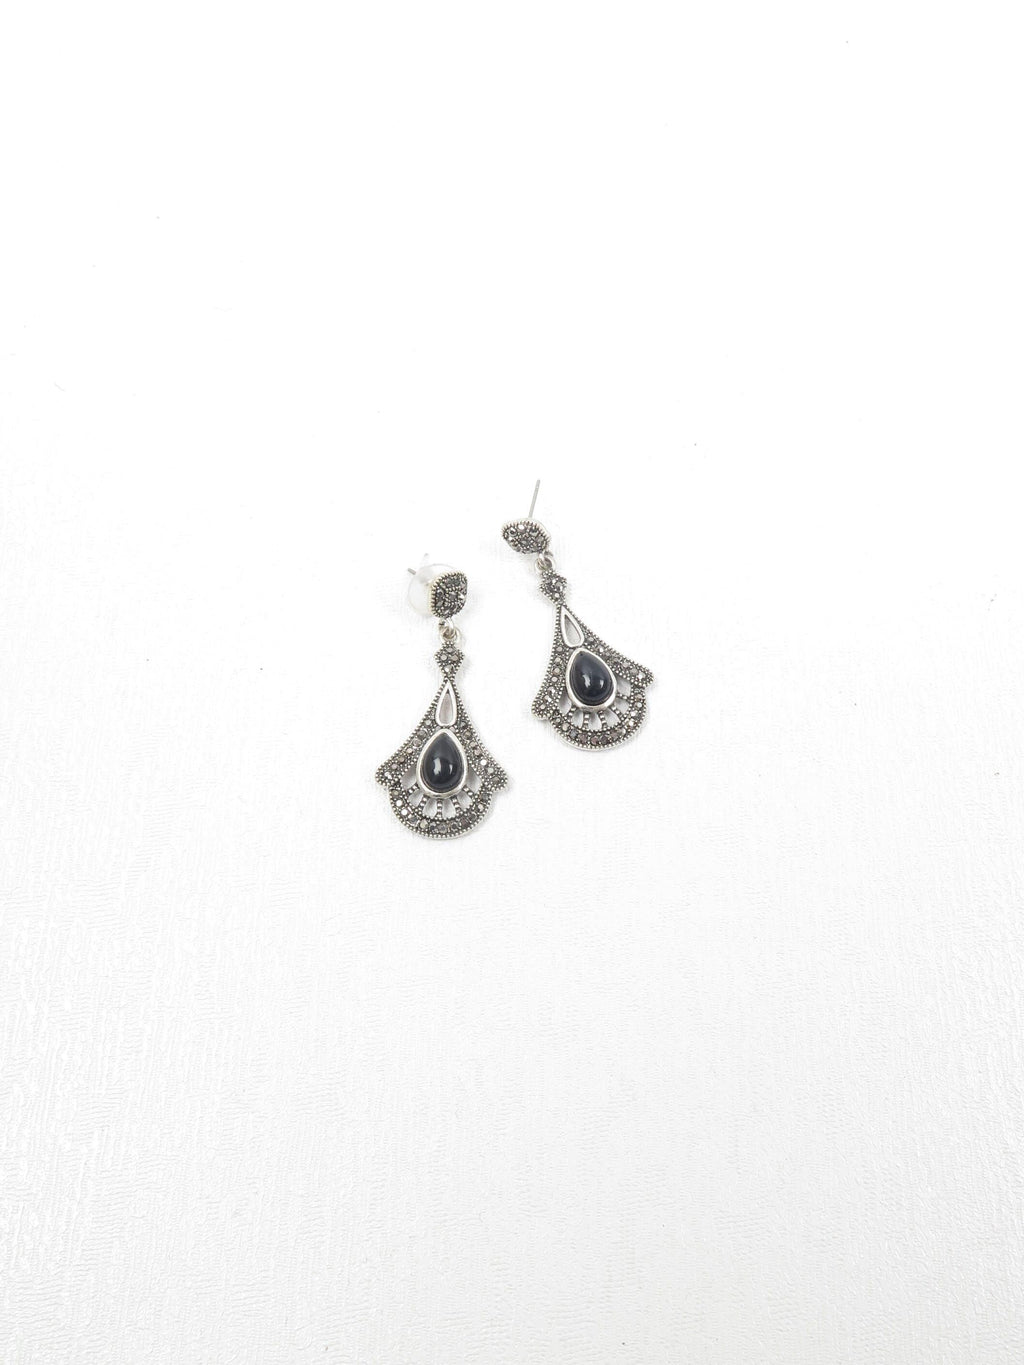 1920's Style Marcasite Drop Earrings New - The Harlequin